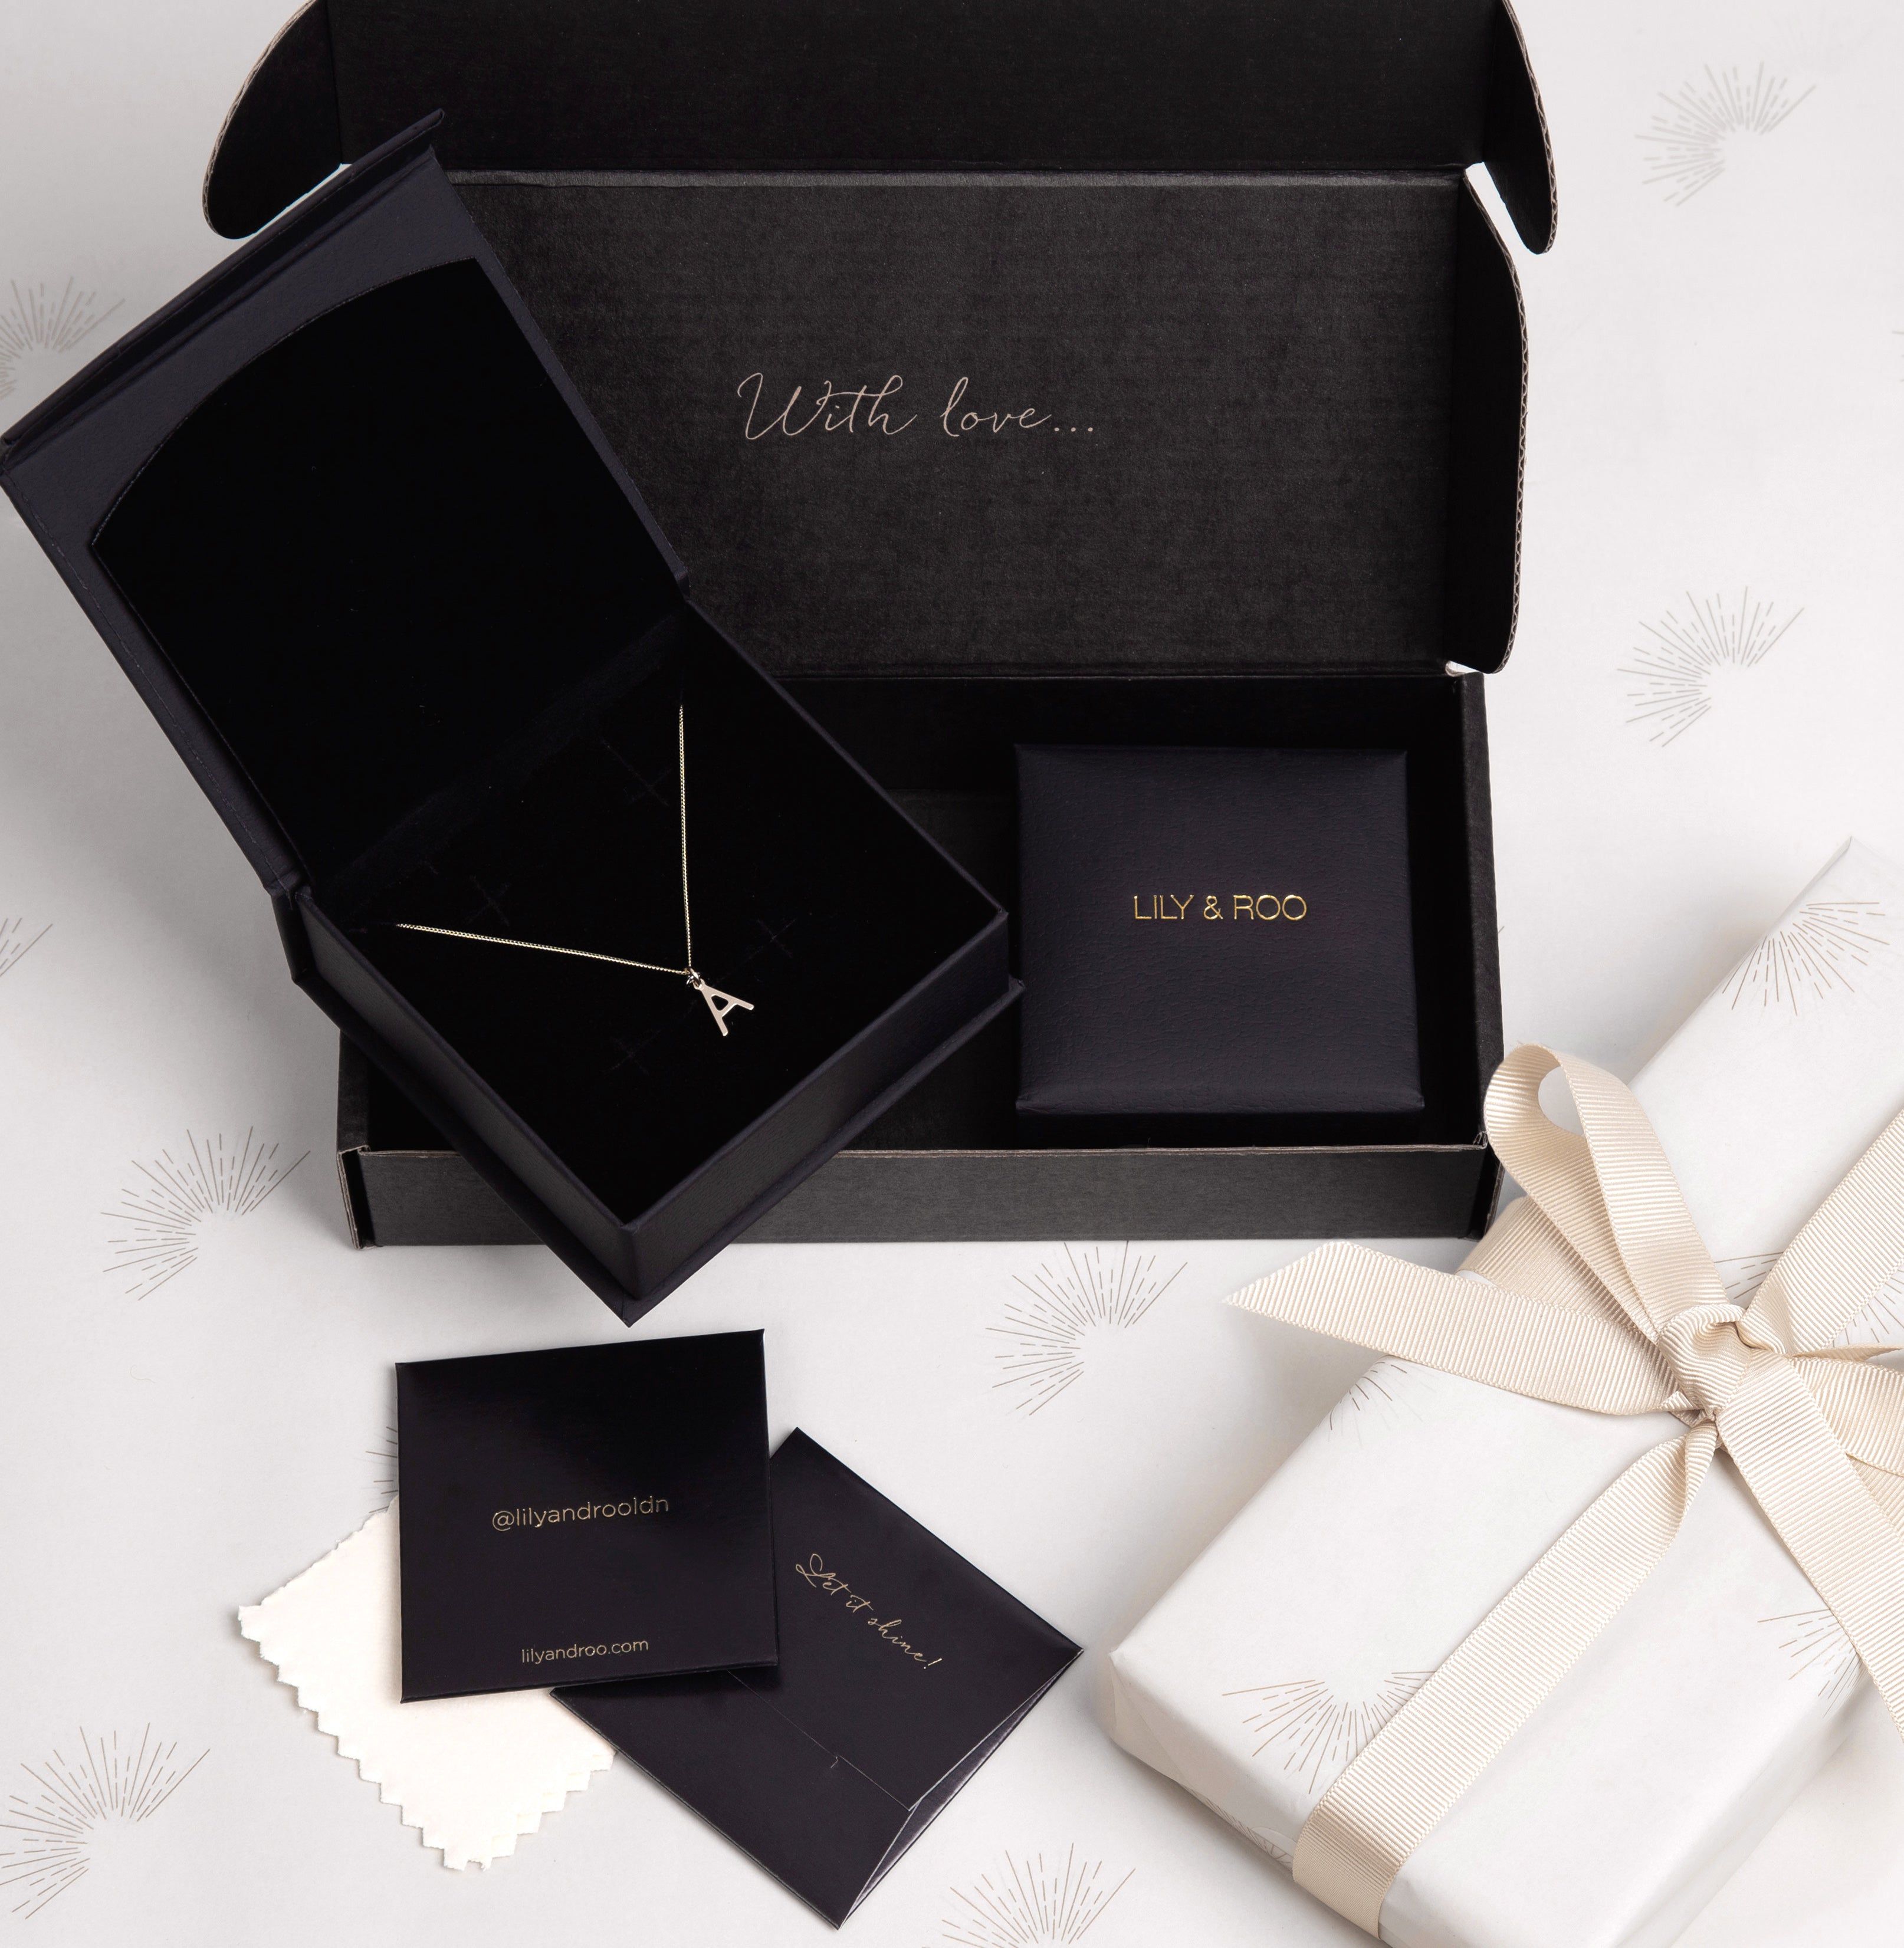 A necklace inside a black gift box alongside other gift boxes